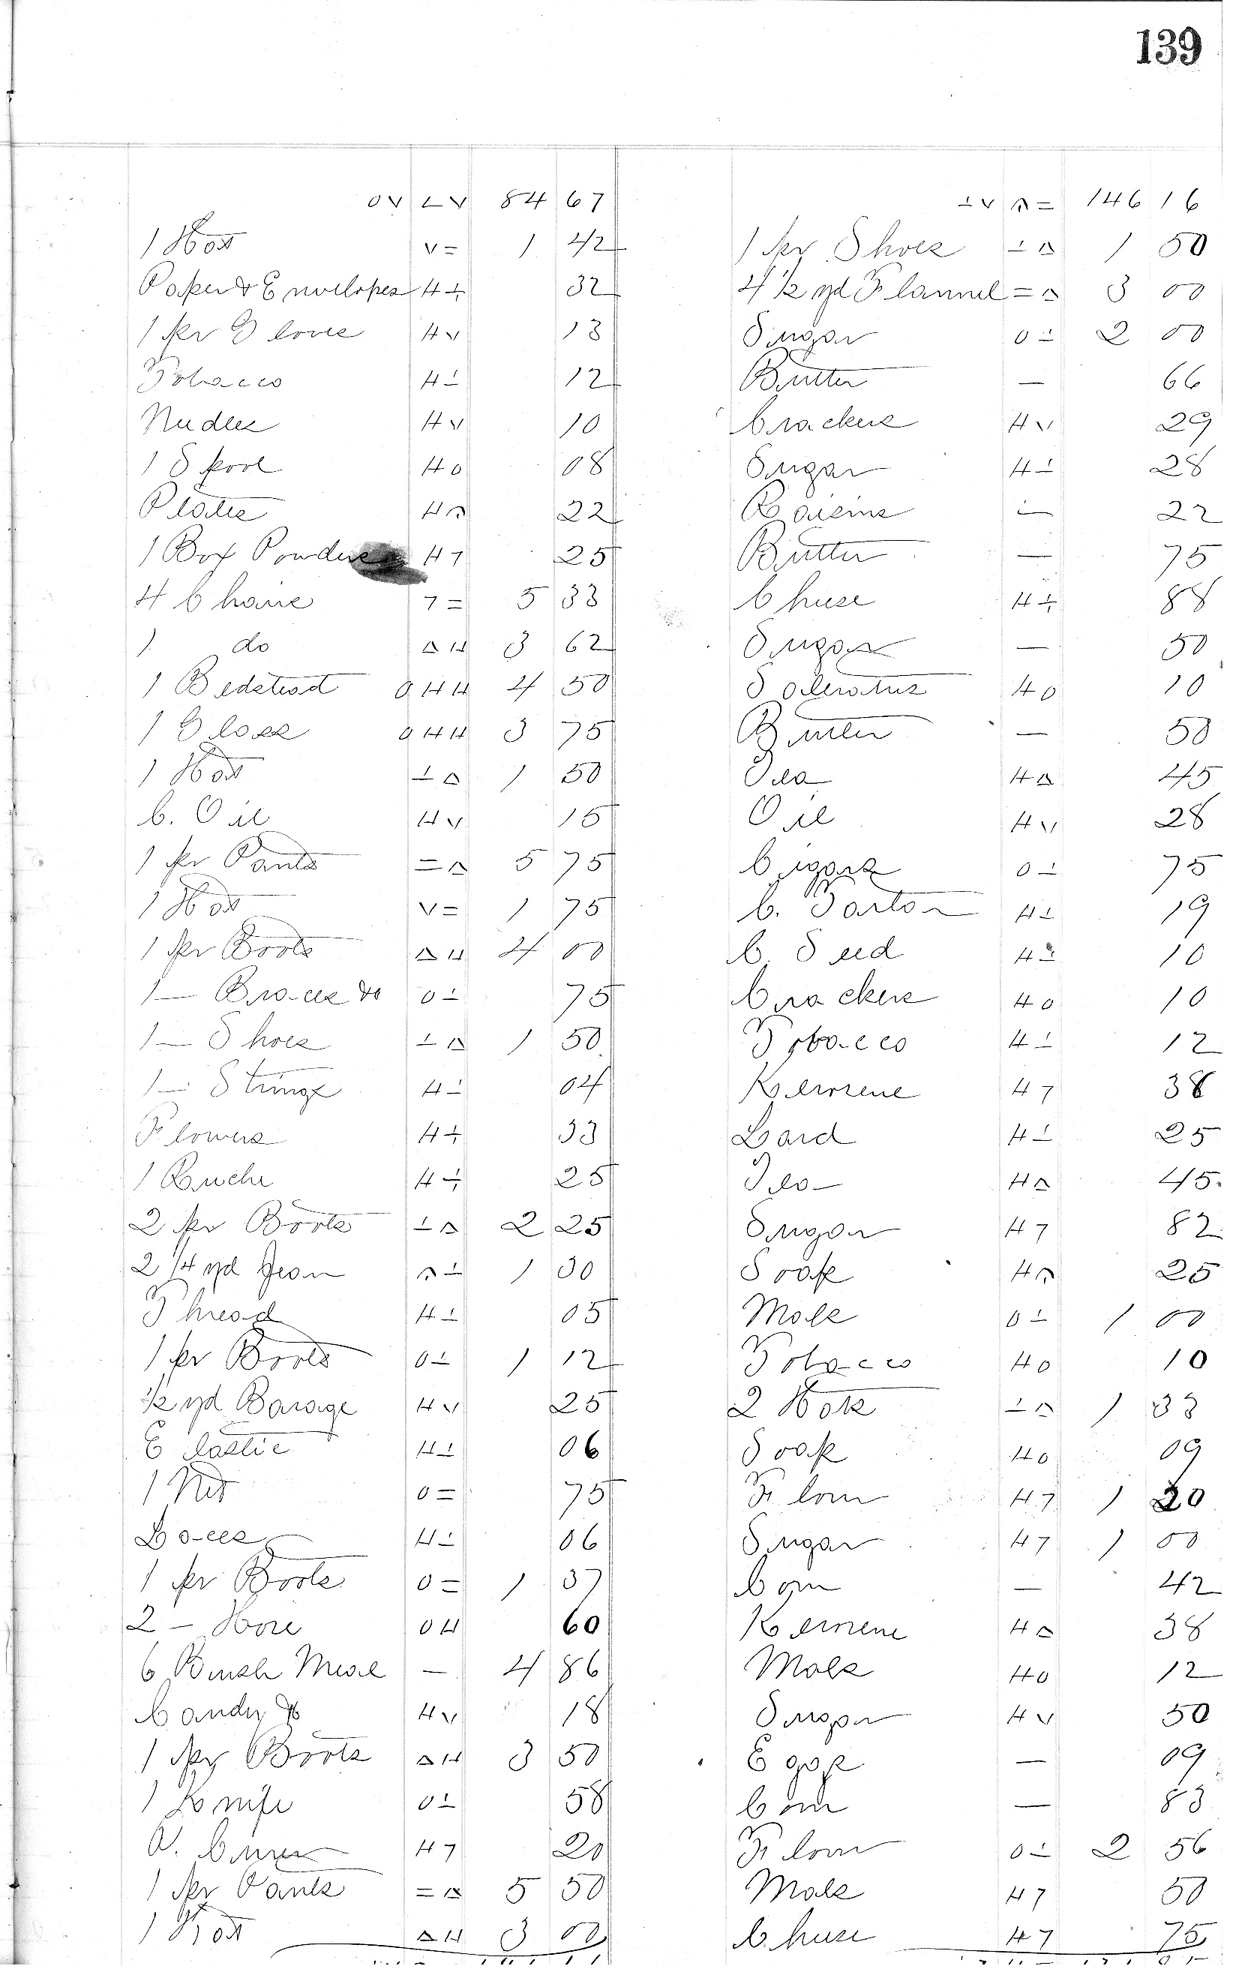 Page 139 from H.K. Keith's 1863 register of daily sales